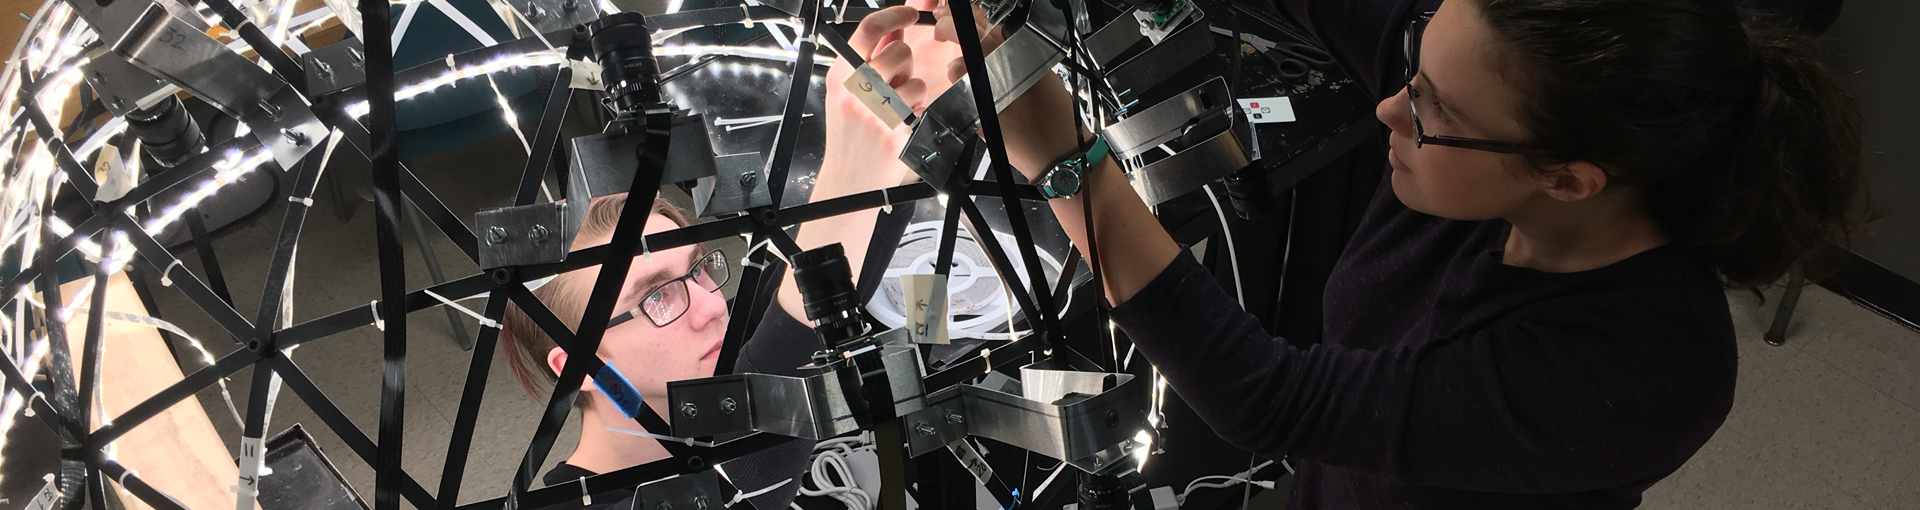 two female students working on dome-shaped imaging system